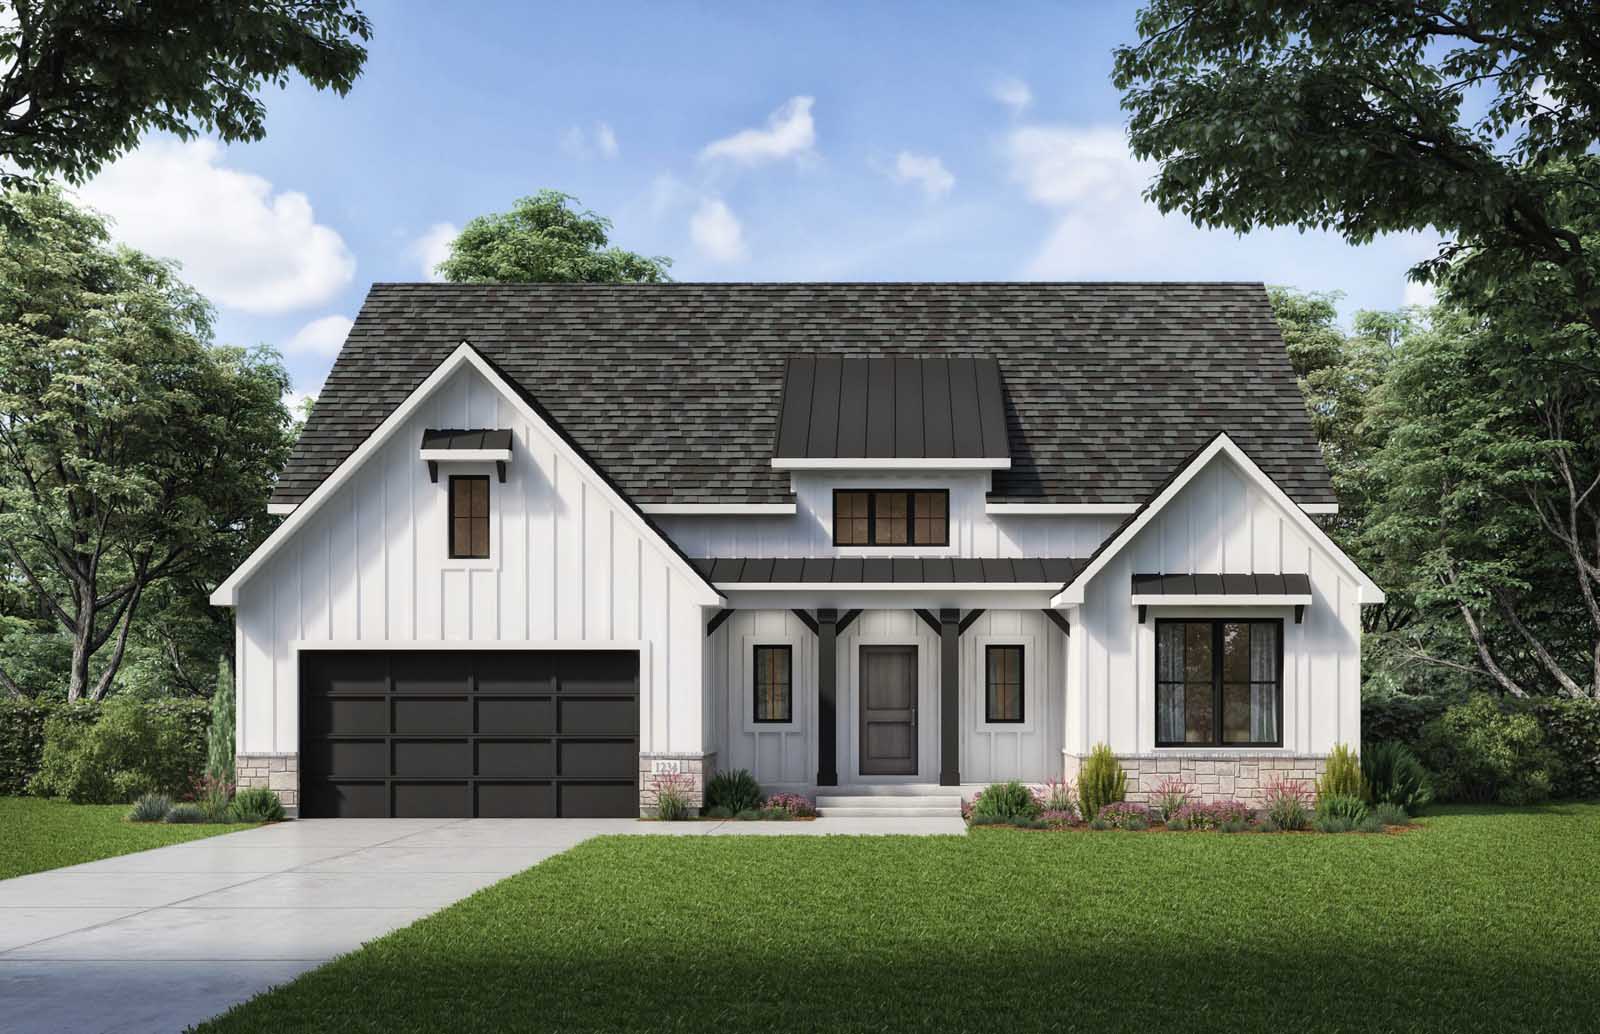 Design Homes The Willow elevation B